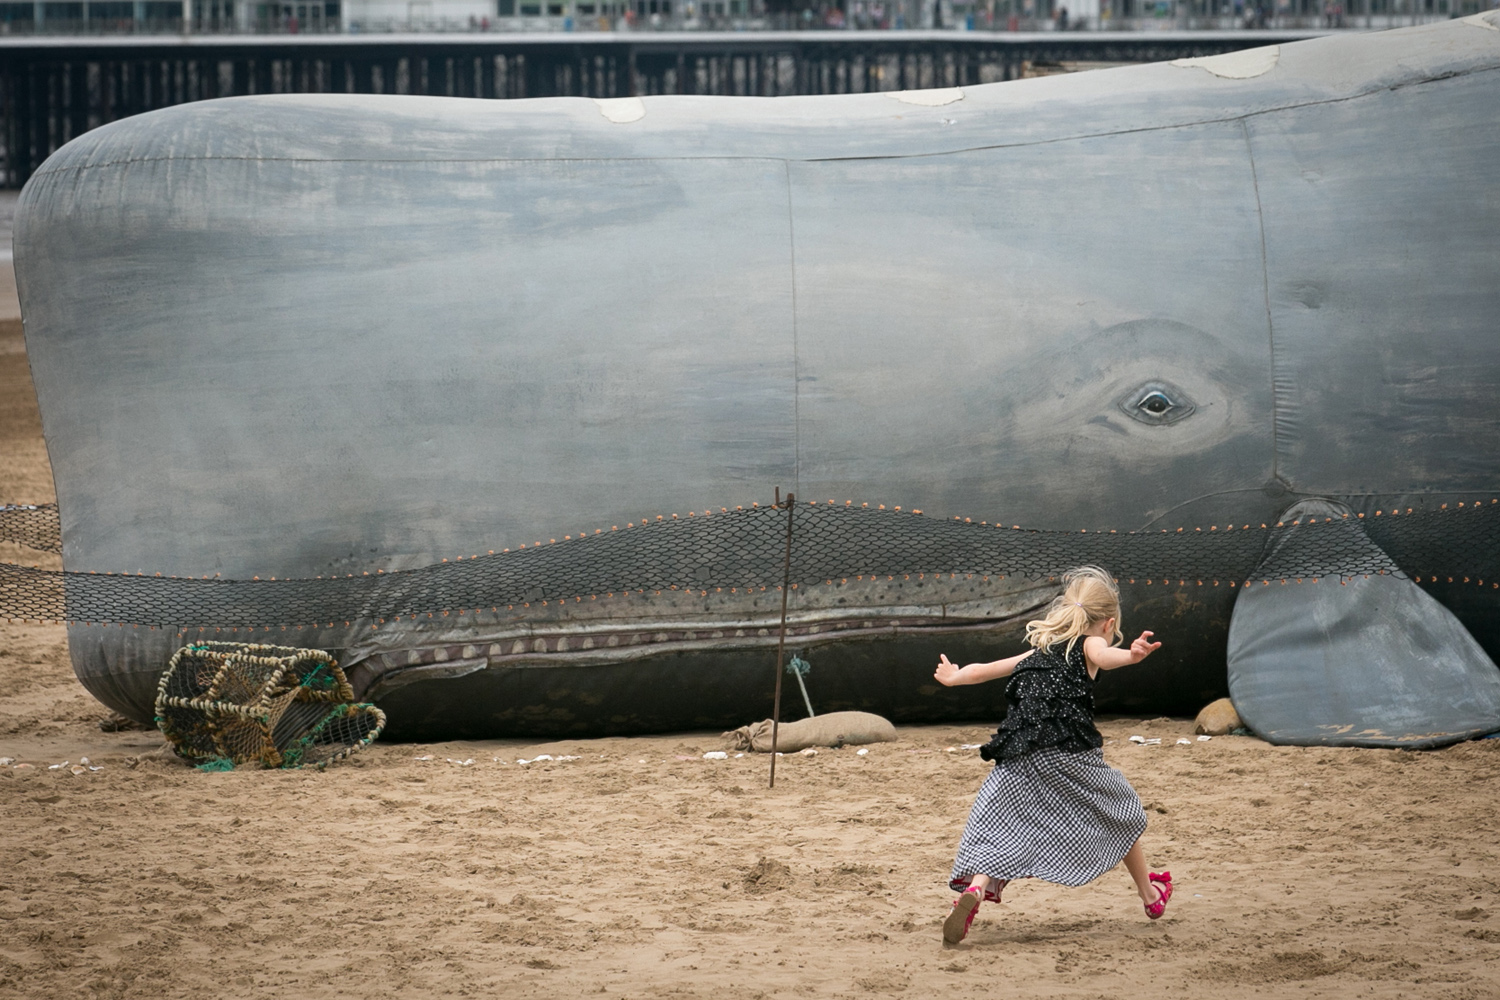 A child plays in front of a 50ft (15m) inflatable whale that has been erected on the beach in Weston-Super-Mare, England on Aug. 27, 2014.